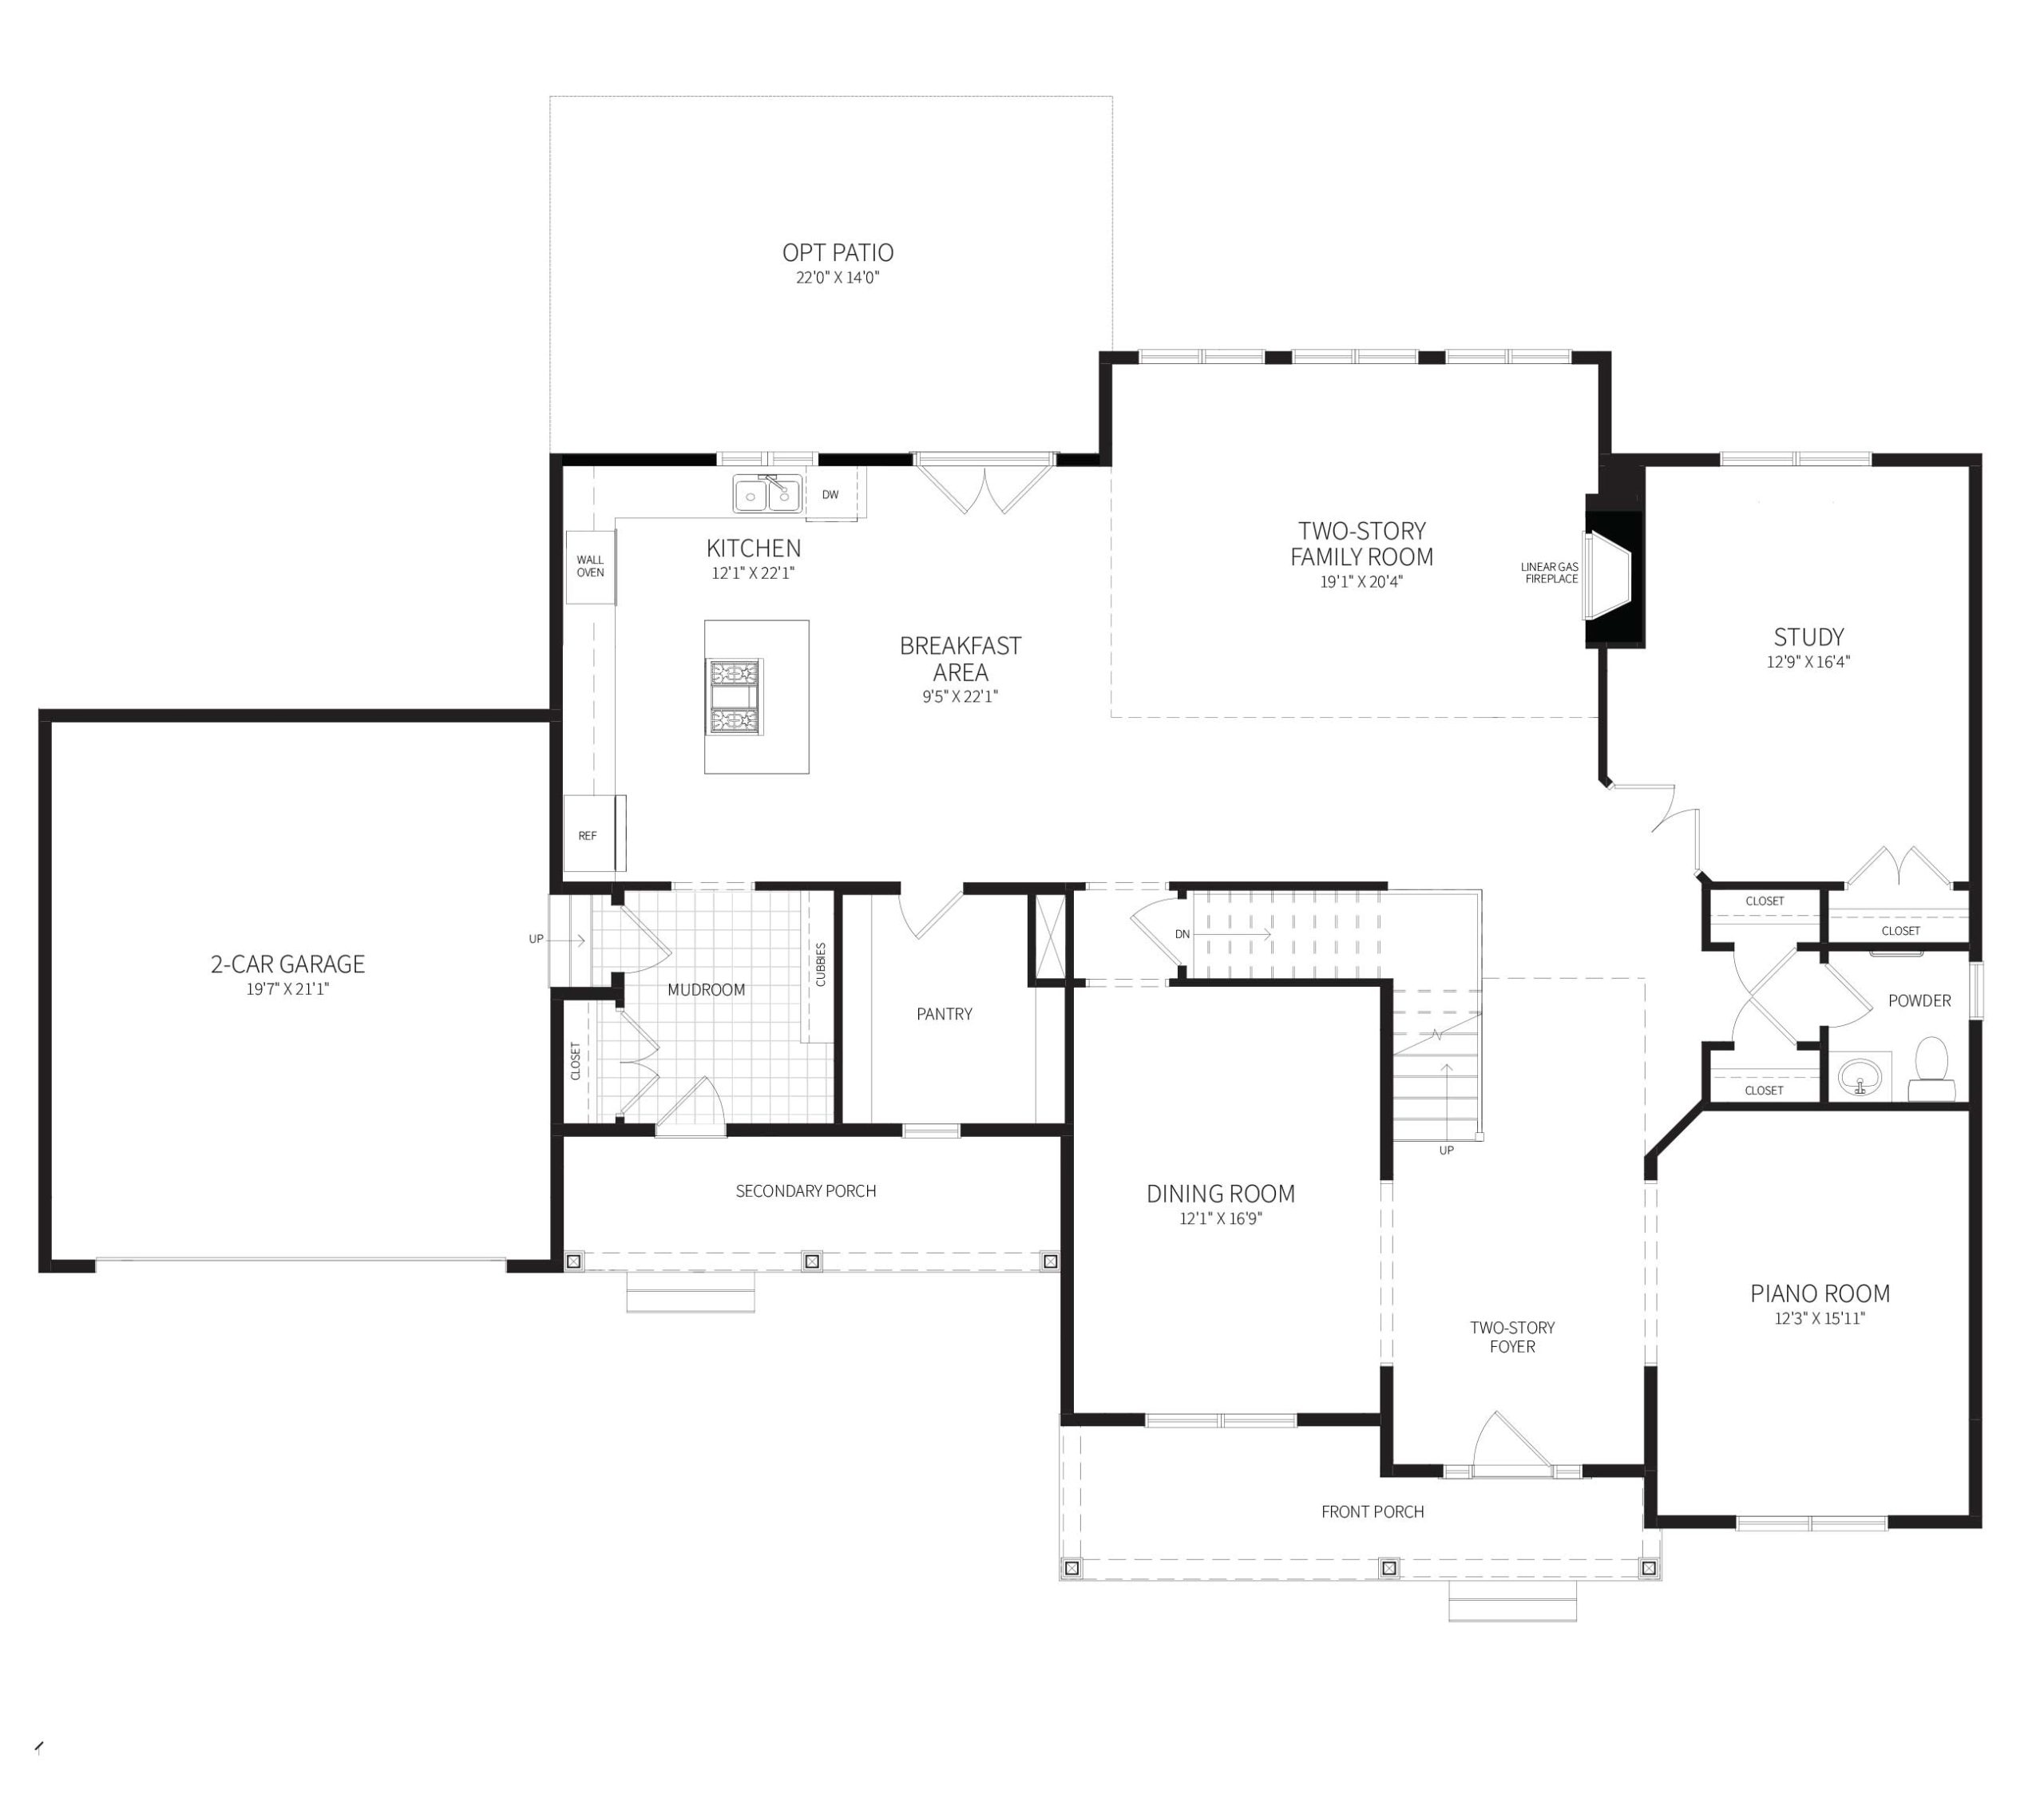 The Avenel model first floor plan featuring dual front entrances with porches, and wide open spaces in the front and rear of the home.